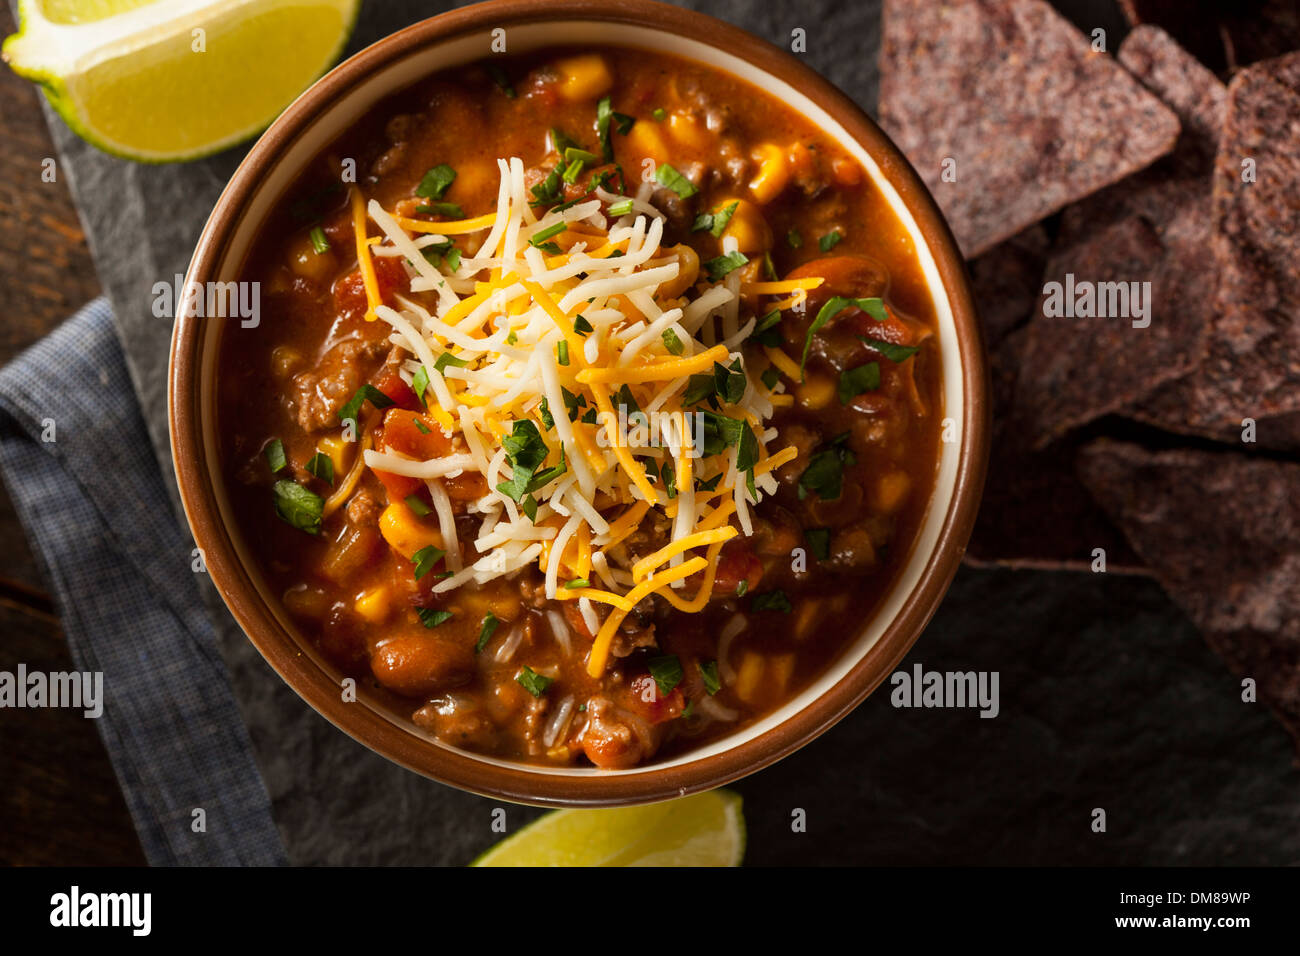 Soutwestern Santa Fe Soup with Beans Corn and Cheese Stock Photo